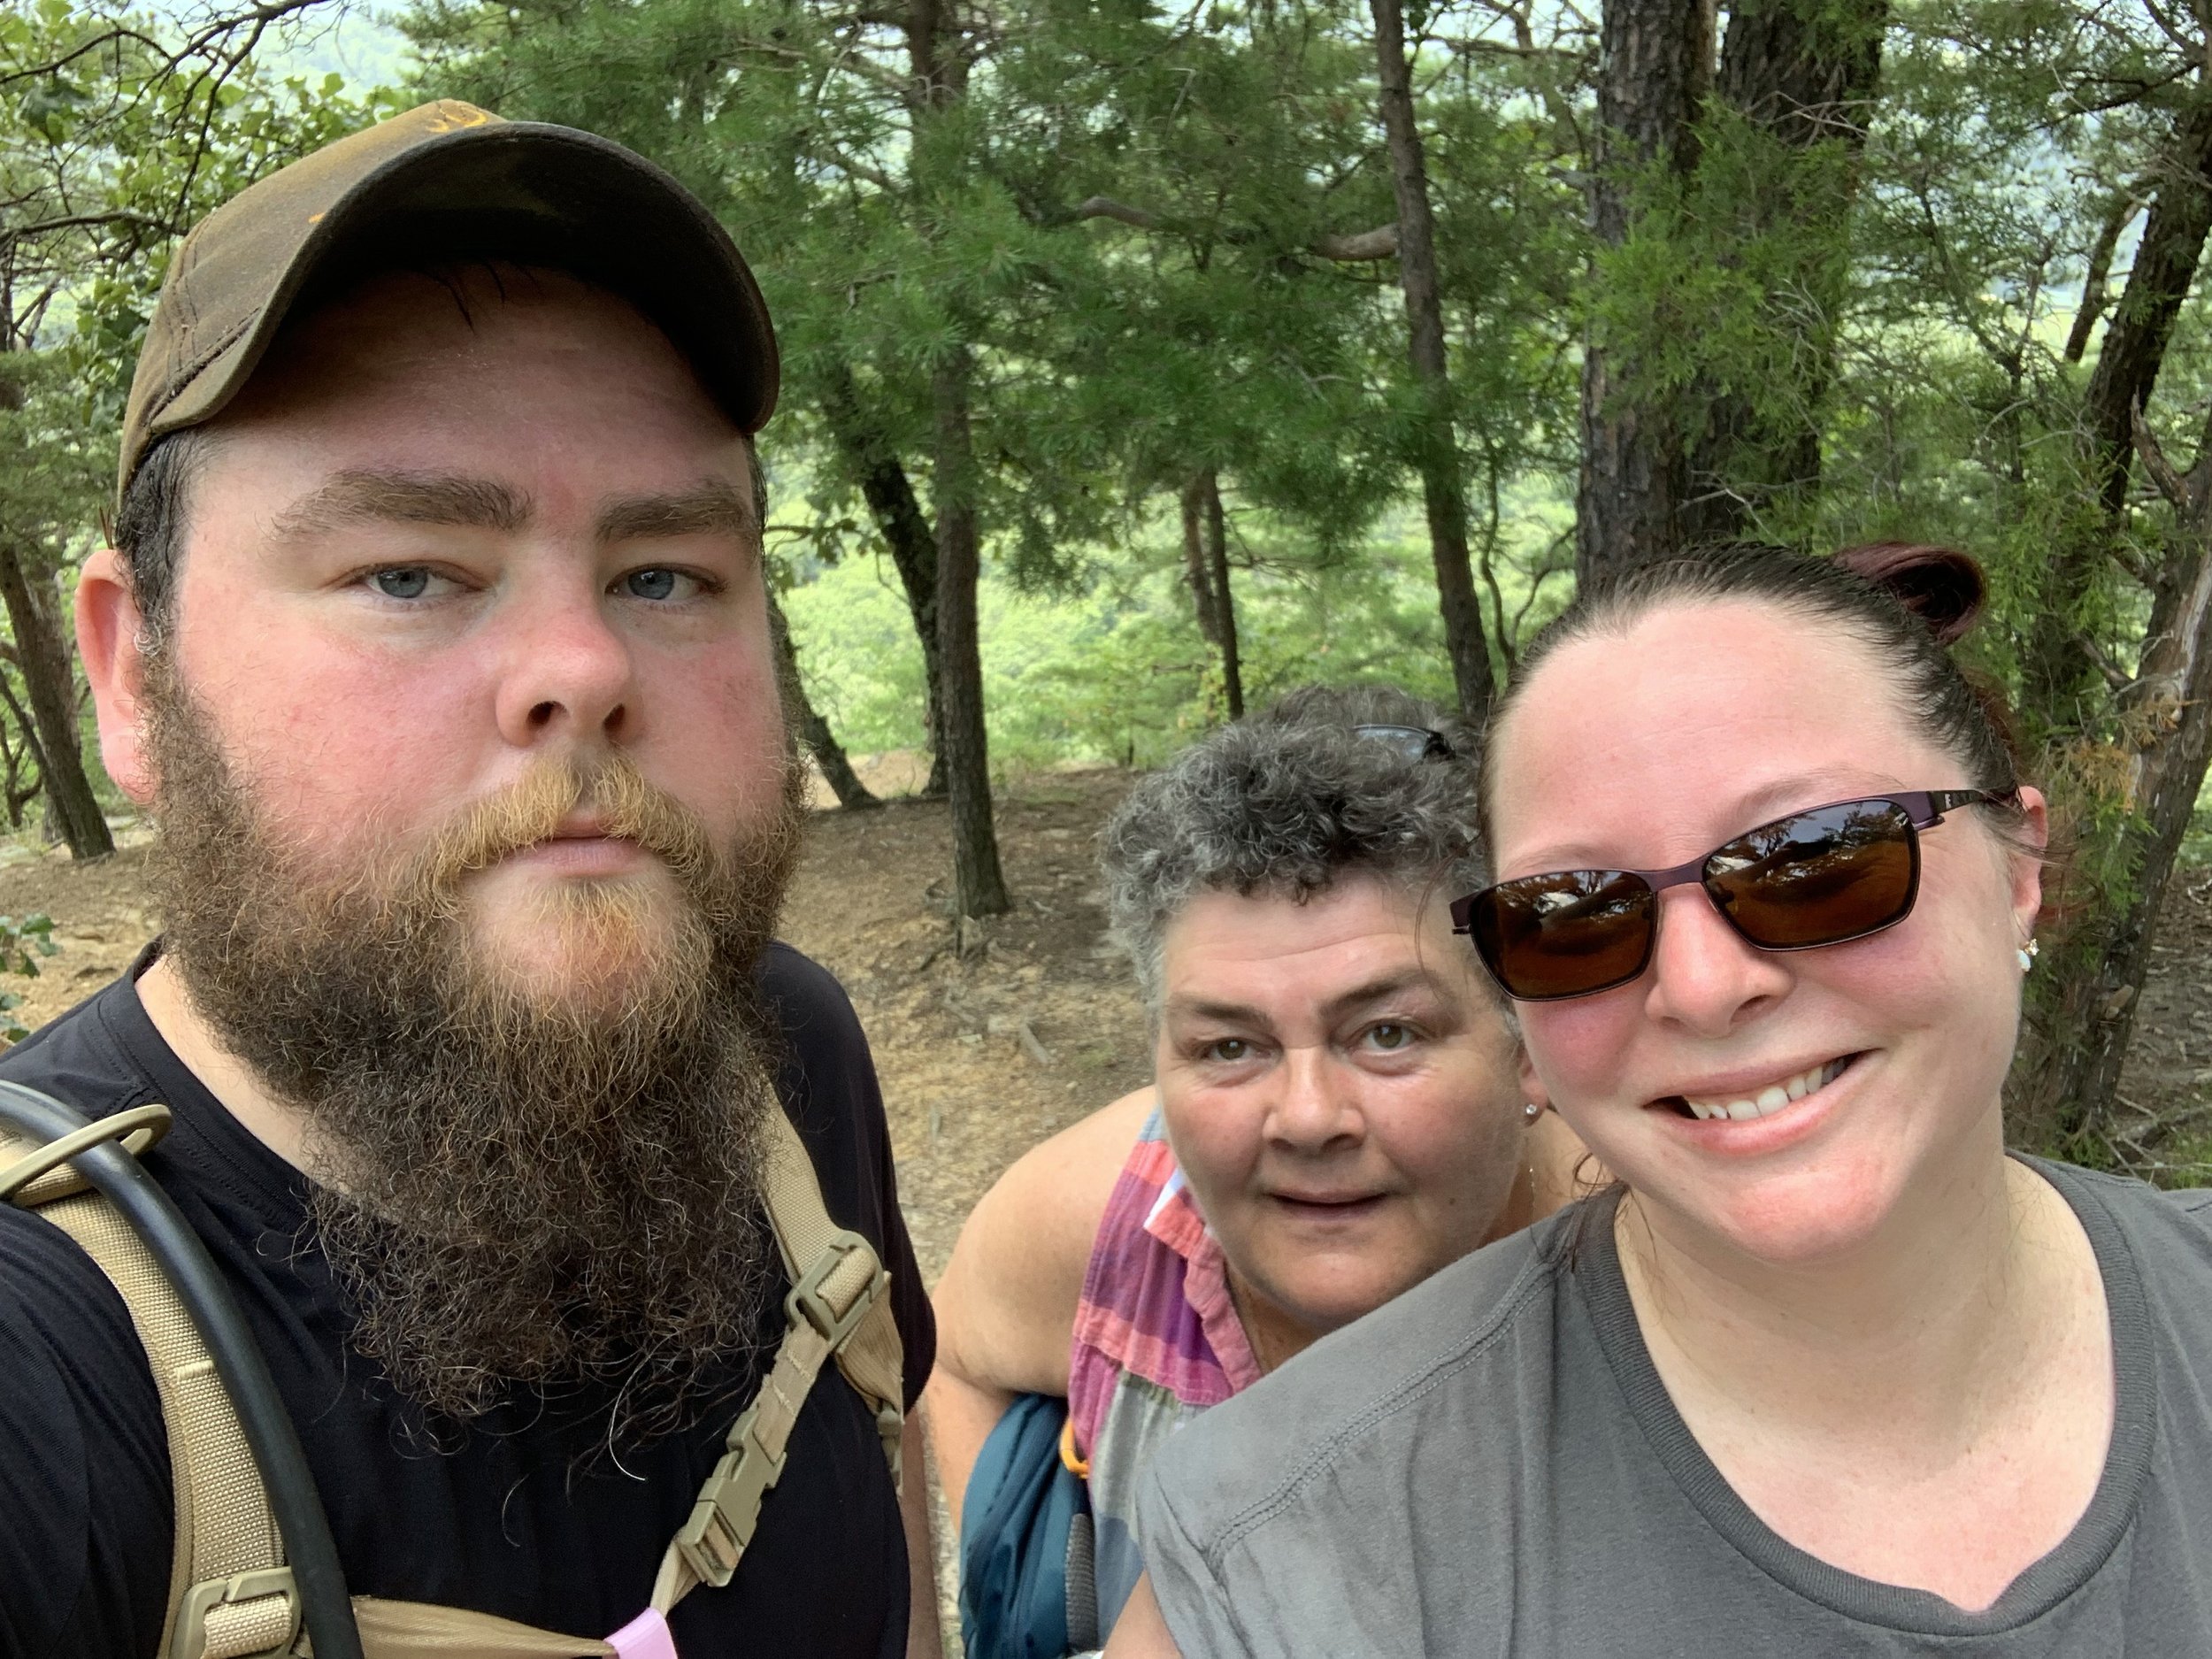 Myself, the wife, and mom, very sweaty from a hot August hike